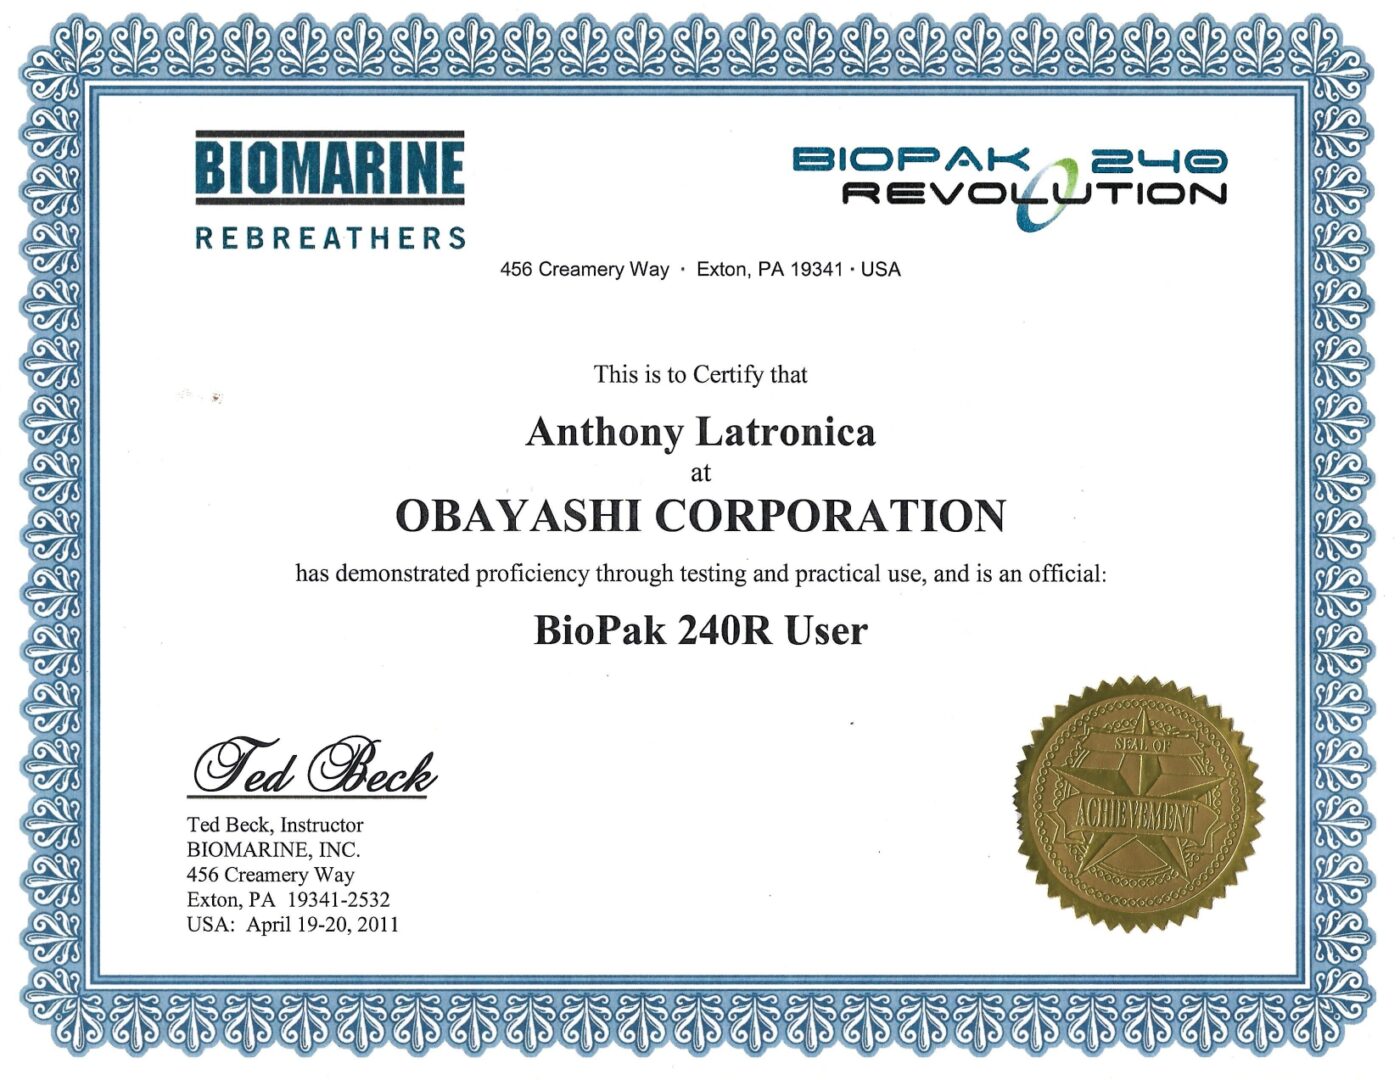 A certificate of recognition for biopak 2 4 0 8 user.